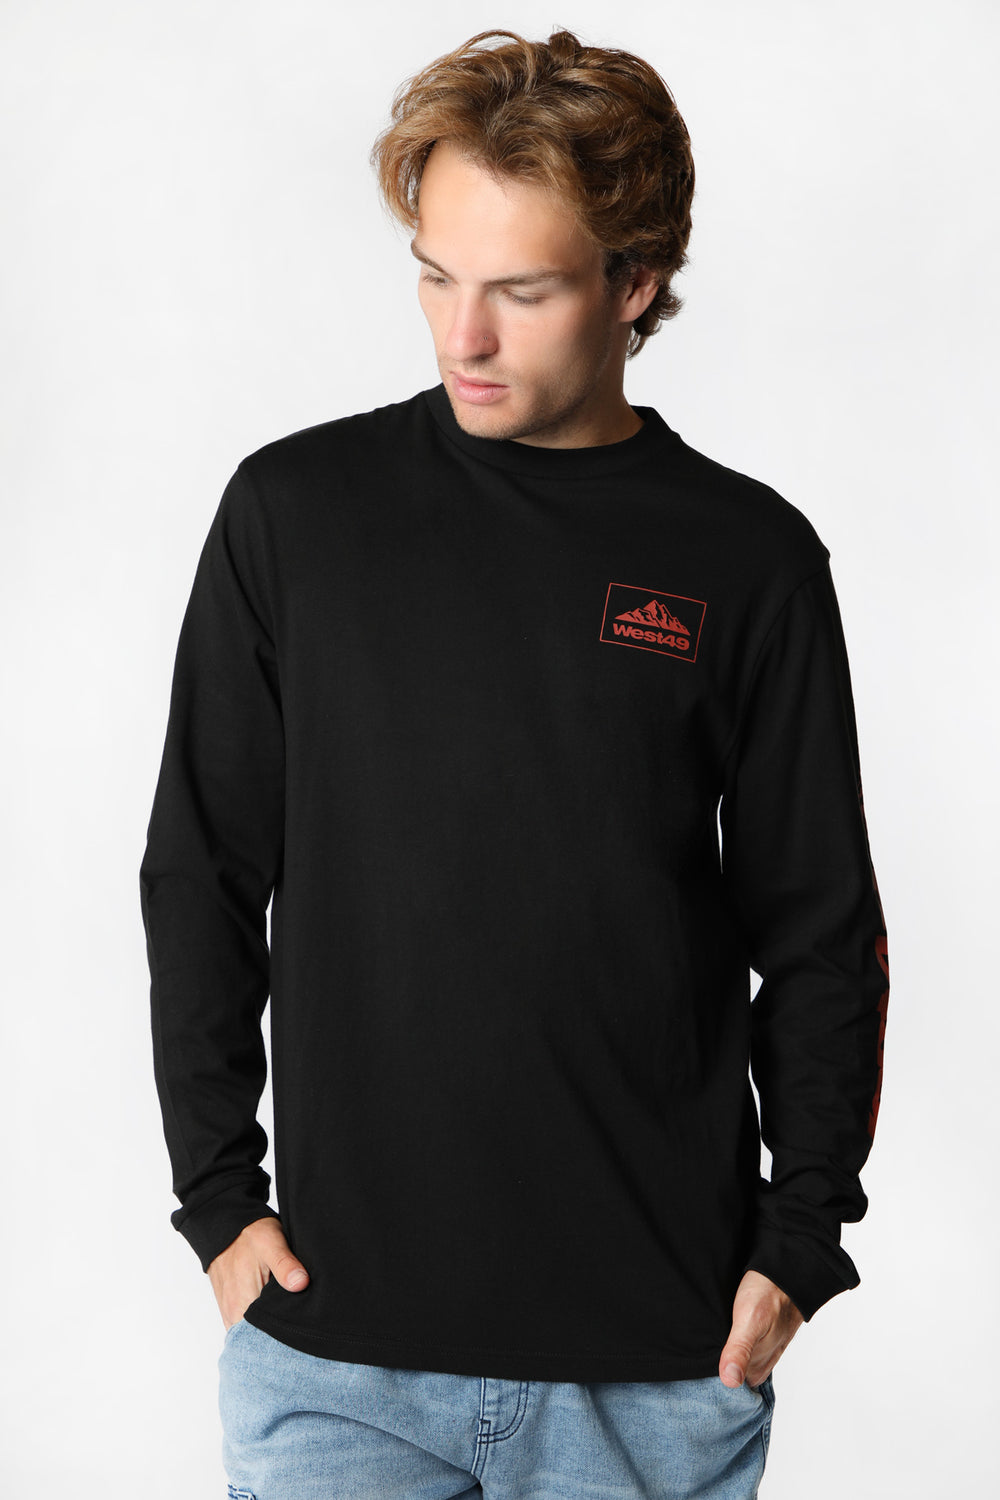 West49 Mens Mountain Long Sleeve Top West49 Mens Mountain Long Sleeve Top